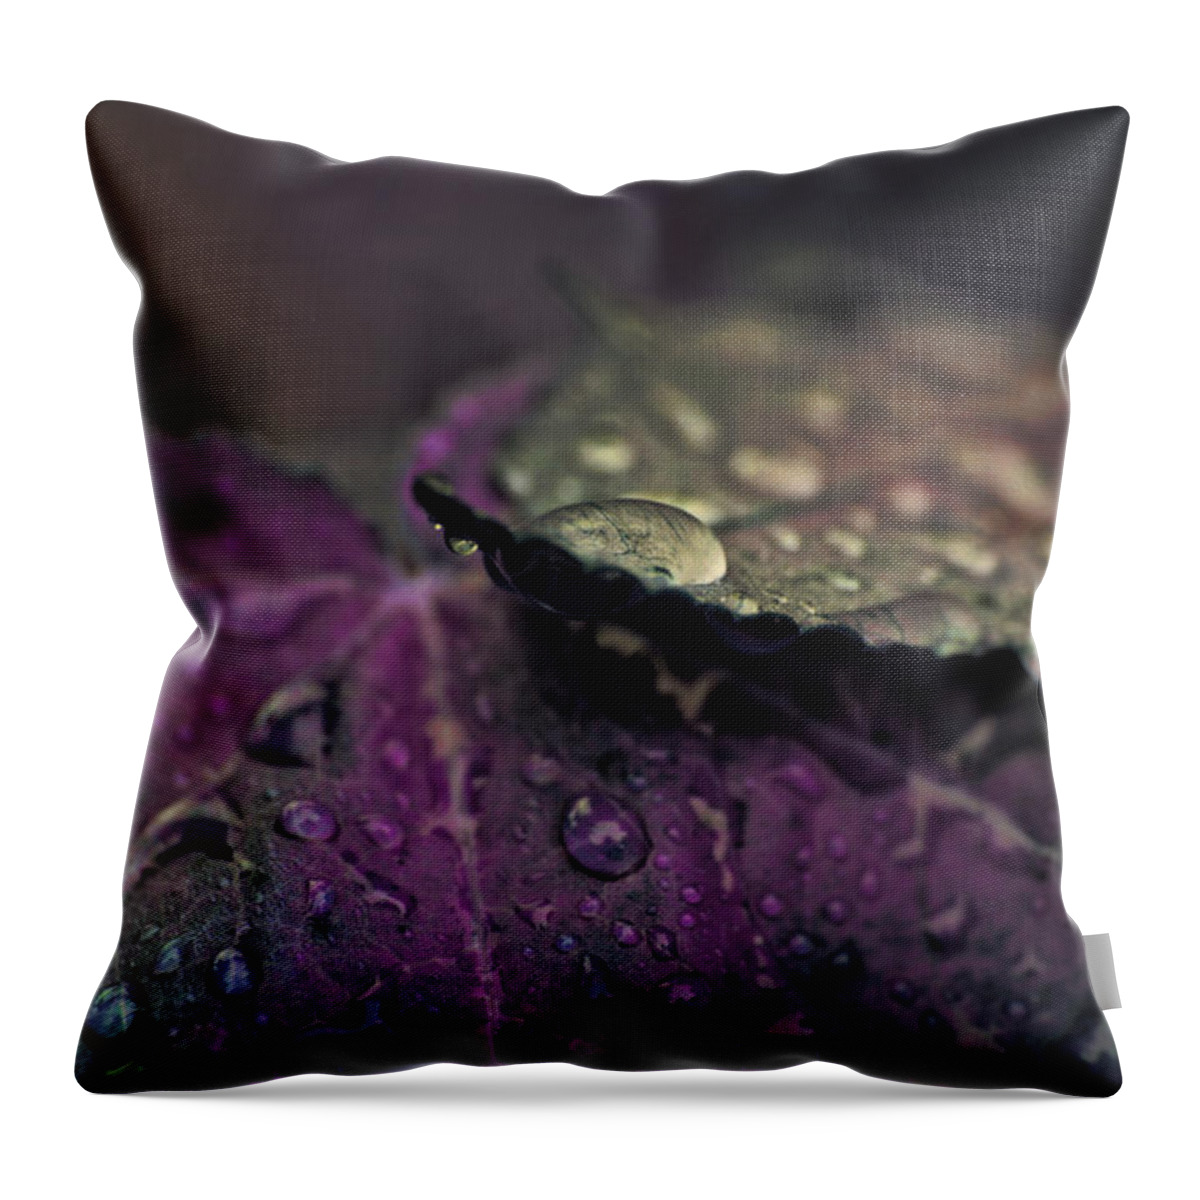 Painted Photo Throw Pillow featuring the painting Wet Purple Leaves by Bonnie Bruno